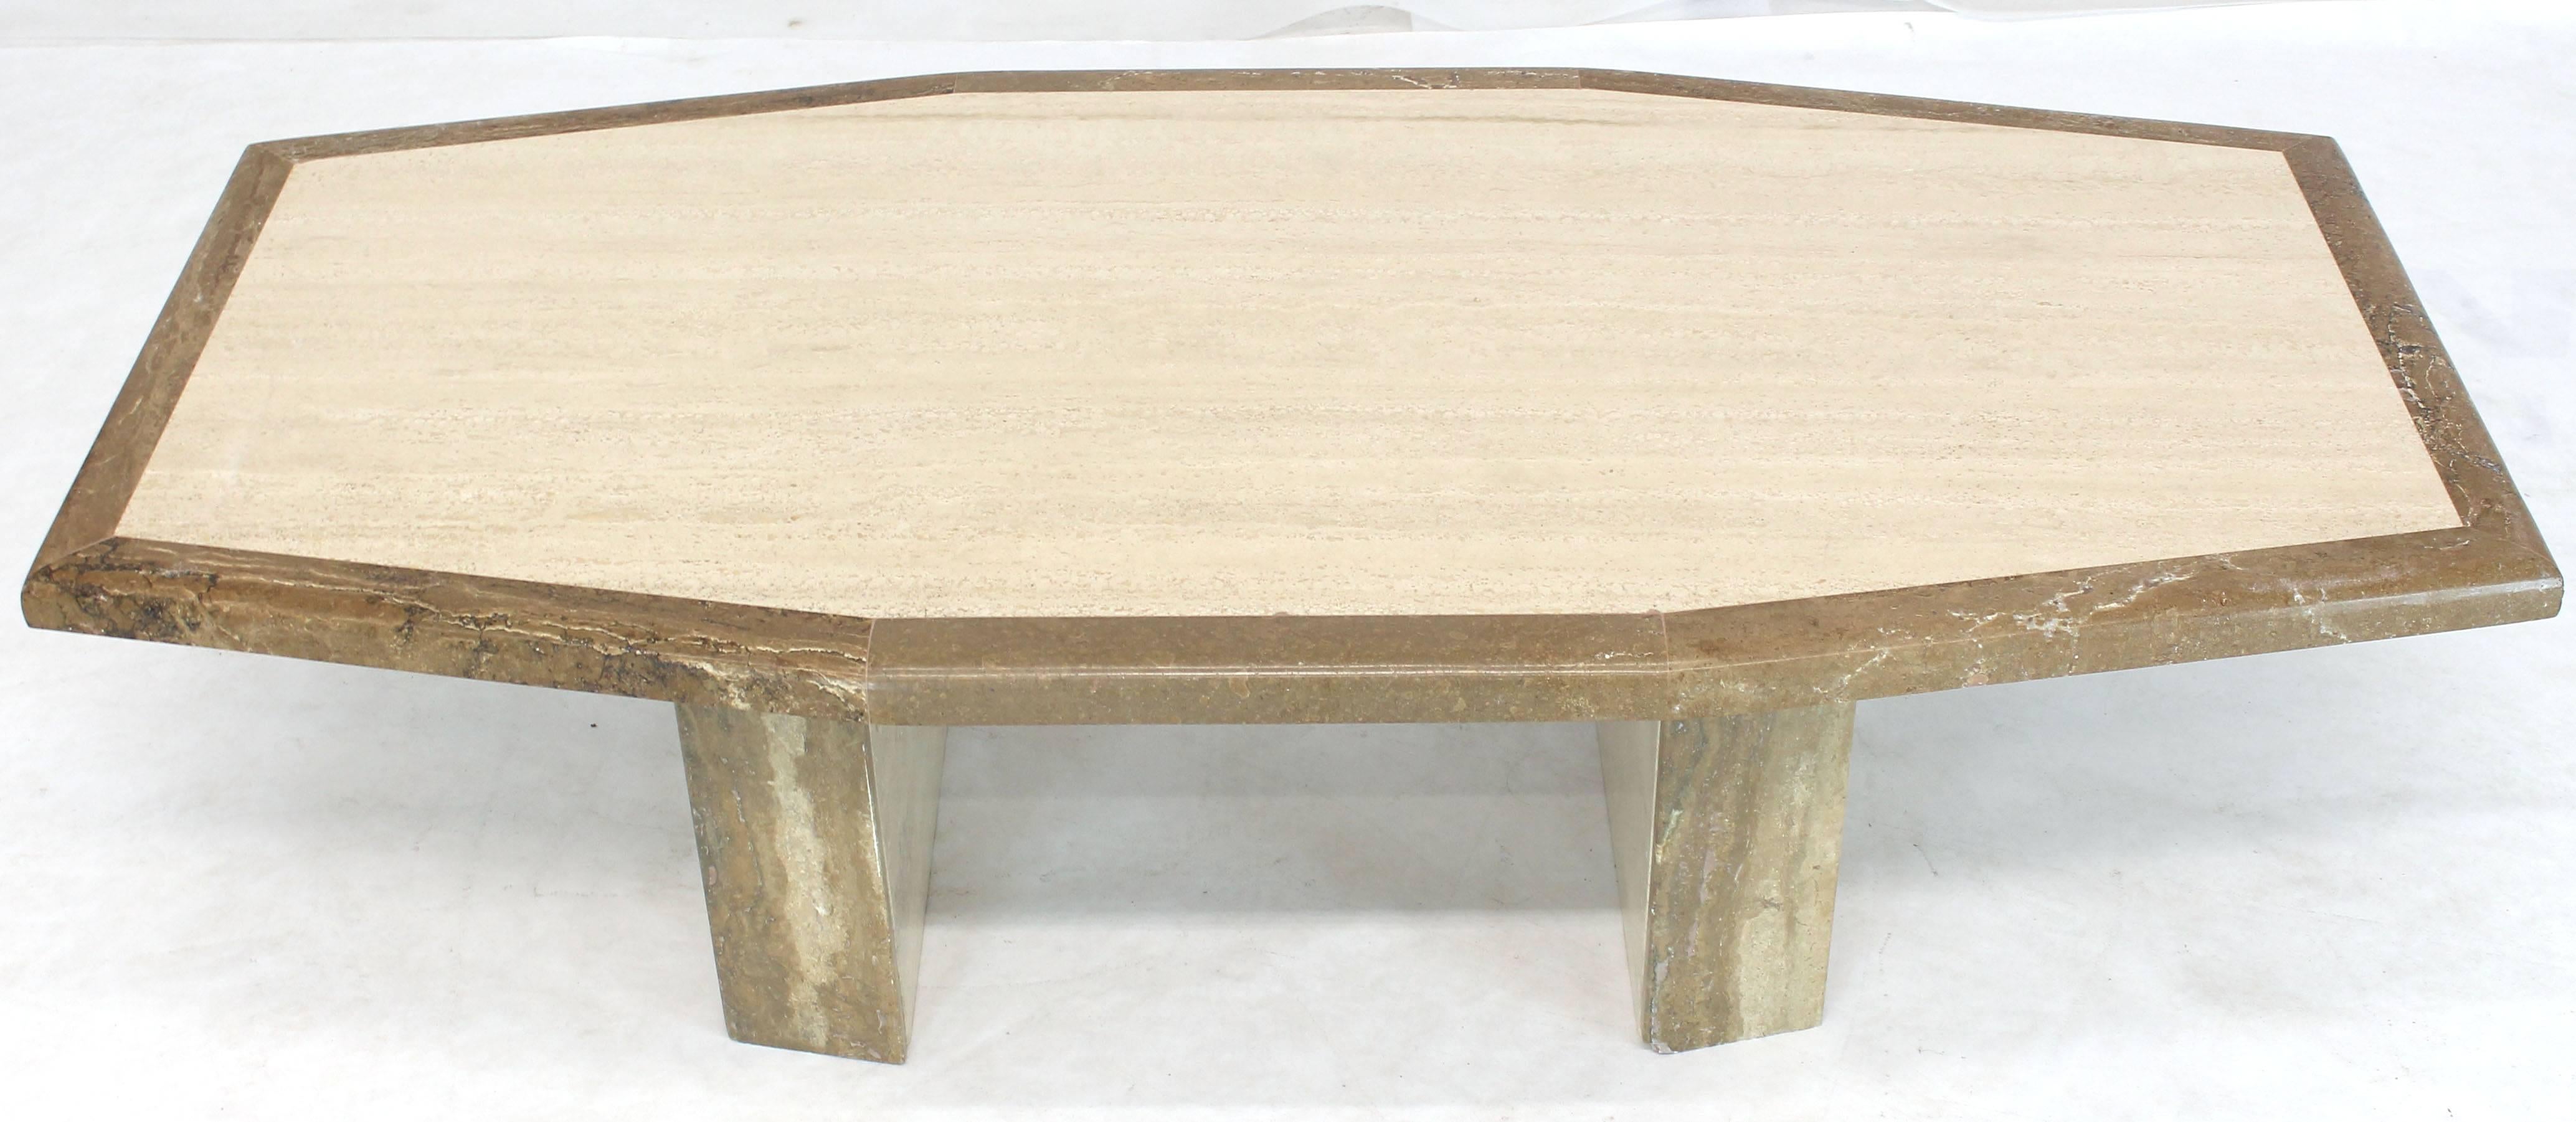 Mid-Century Modern two-tone travertine and marble large boat shape cut rectangle coffee table. Double pedestal stone base.